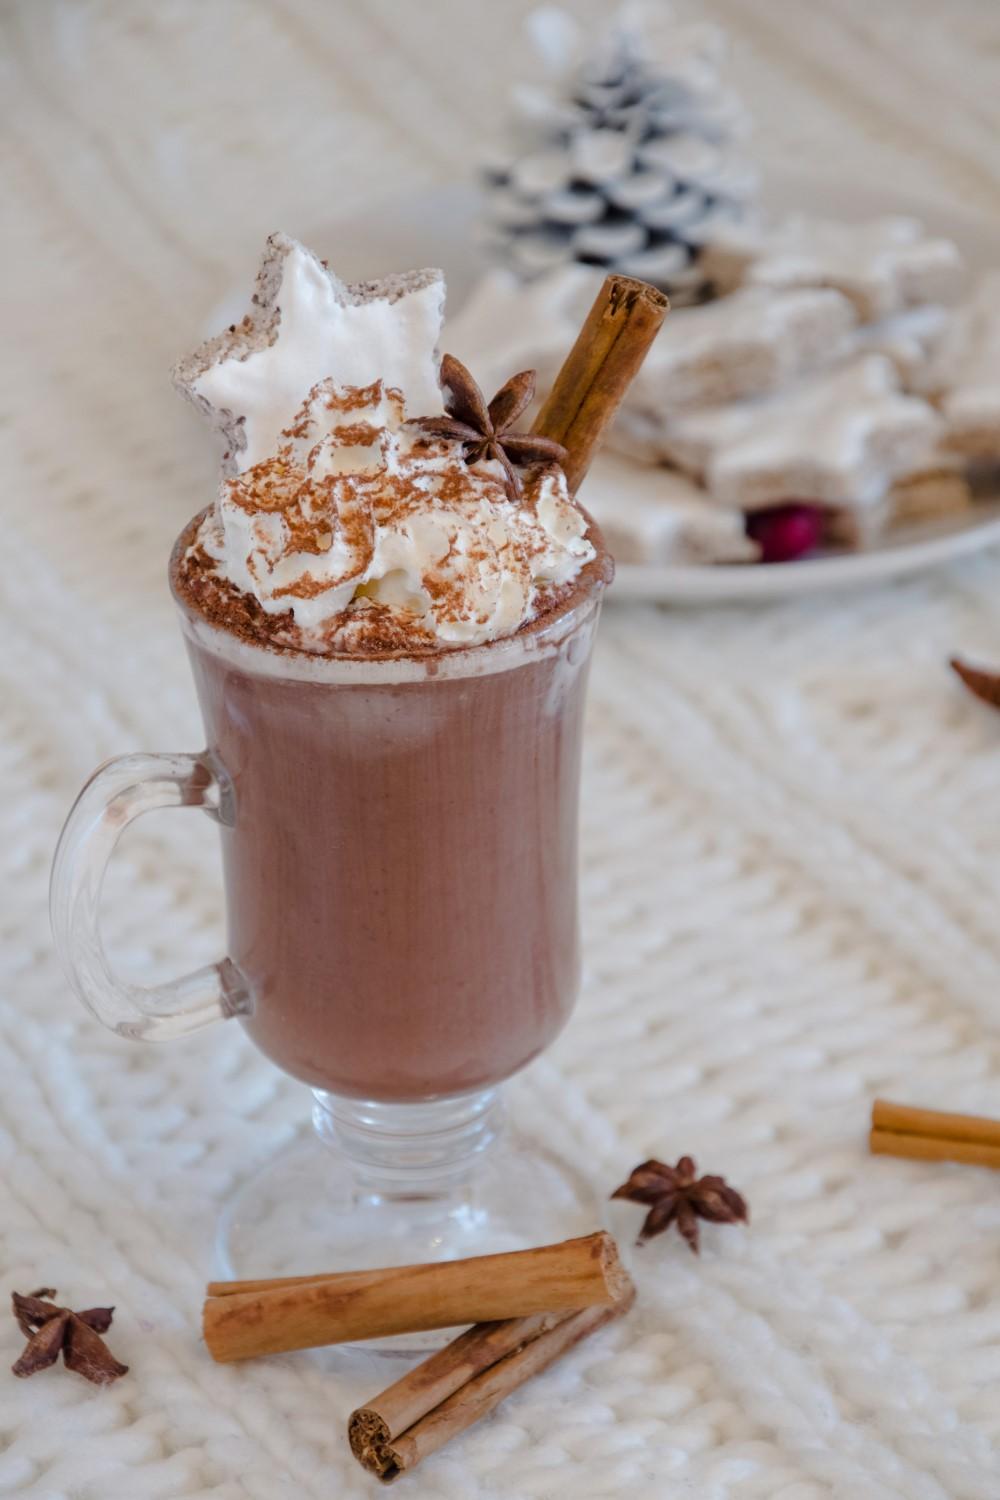 Use Your Noodles - Hot Chocolate